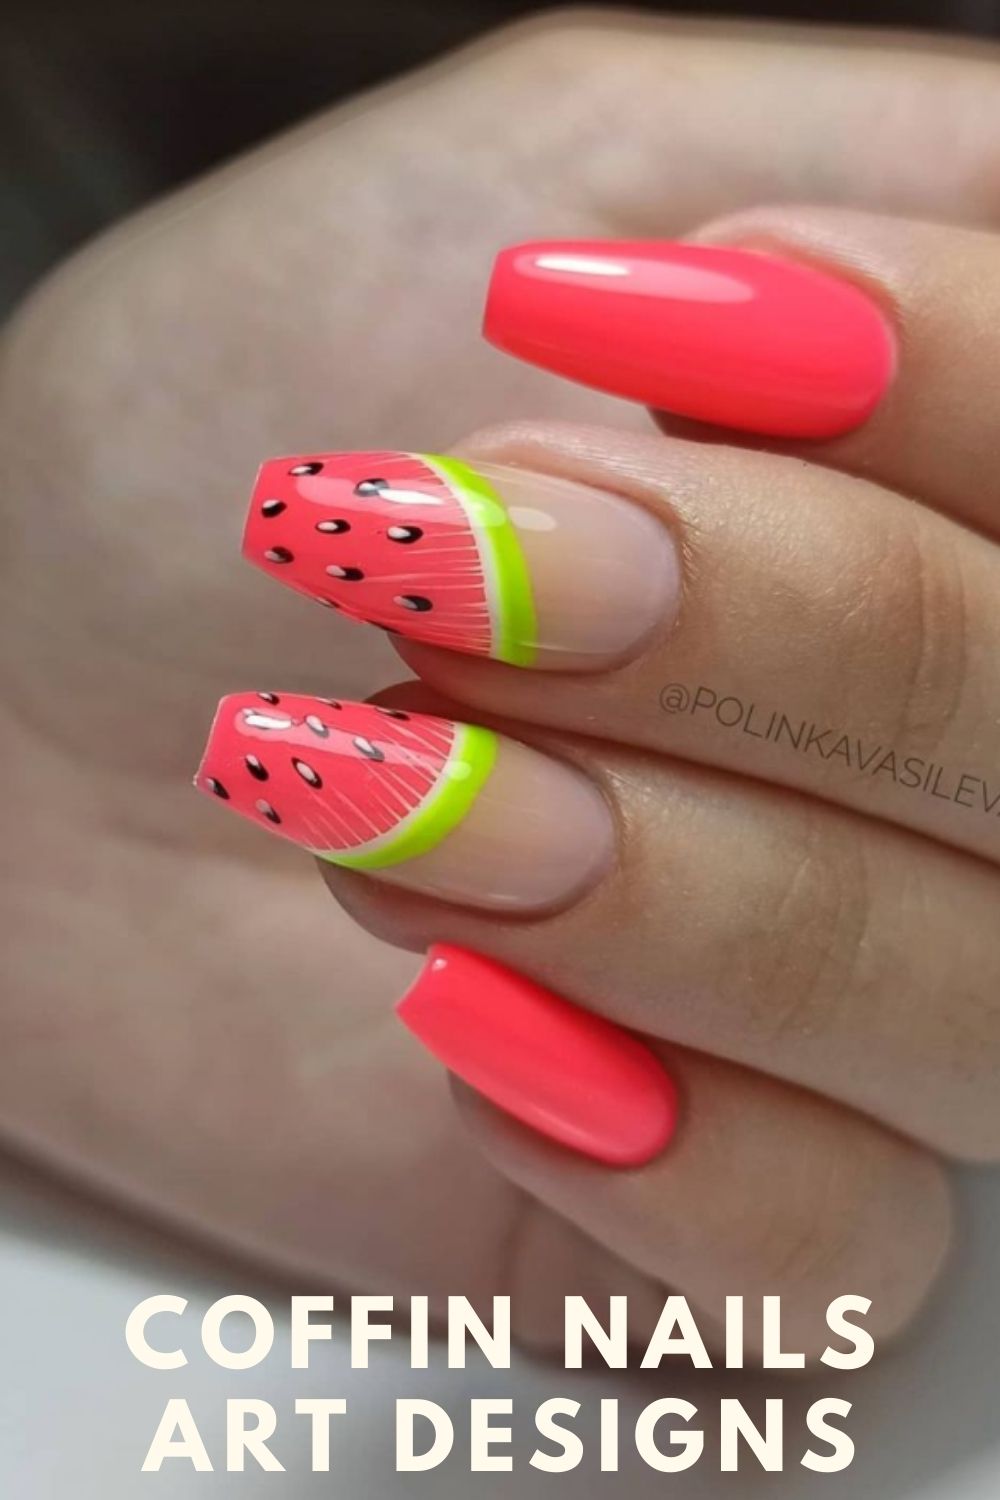 This summer to see such a nail design, even if not eating watermelon, will feel particularly cool